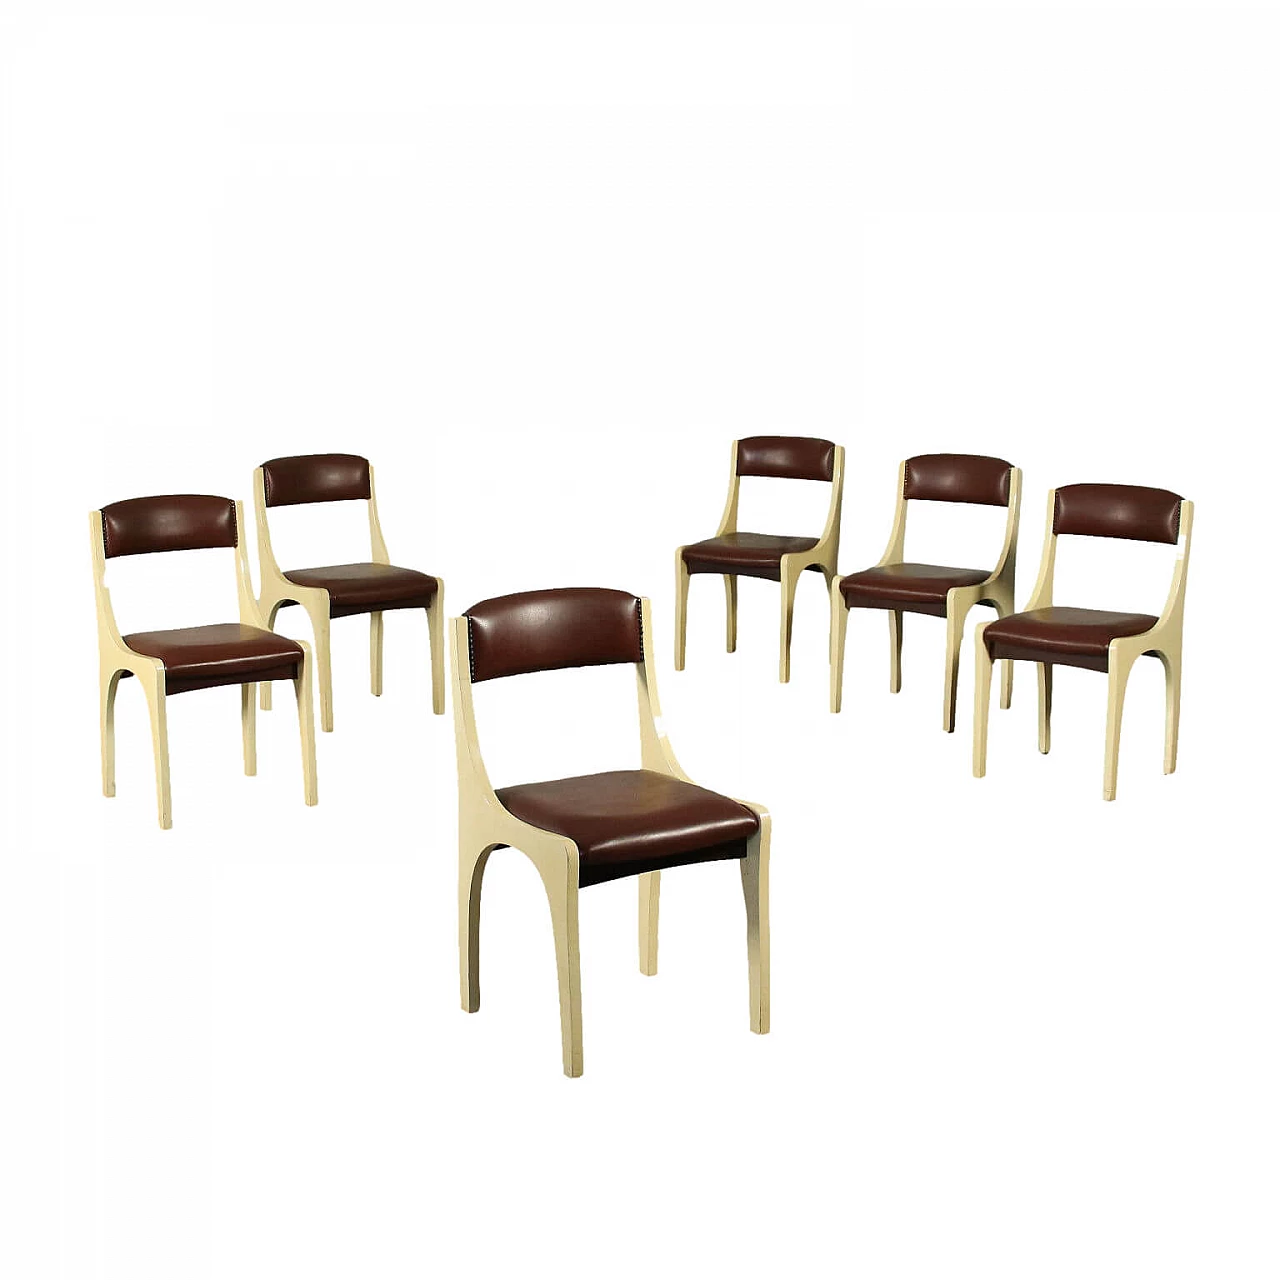 Group of 6 chairs by Aldo Tura, 1960s 1437534